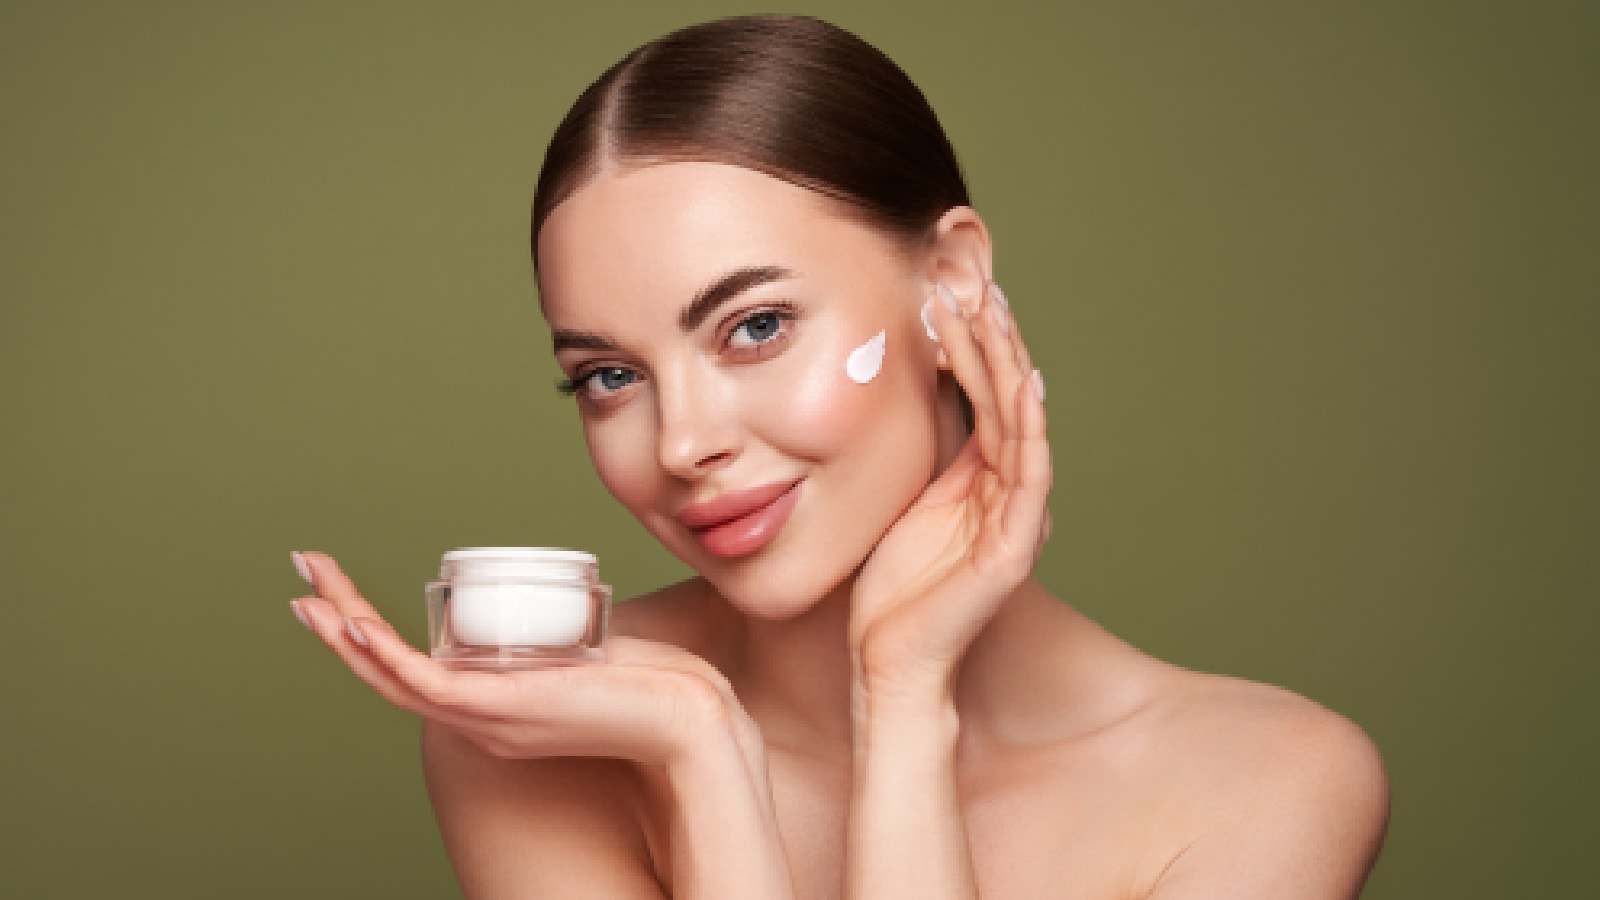 6 best creams for winter to prevent dry skin